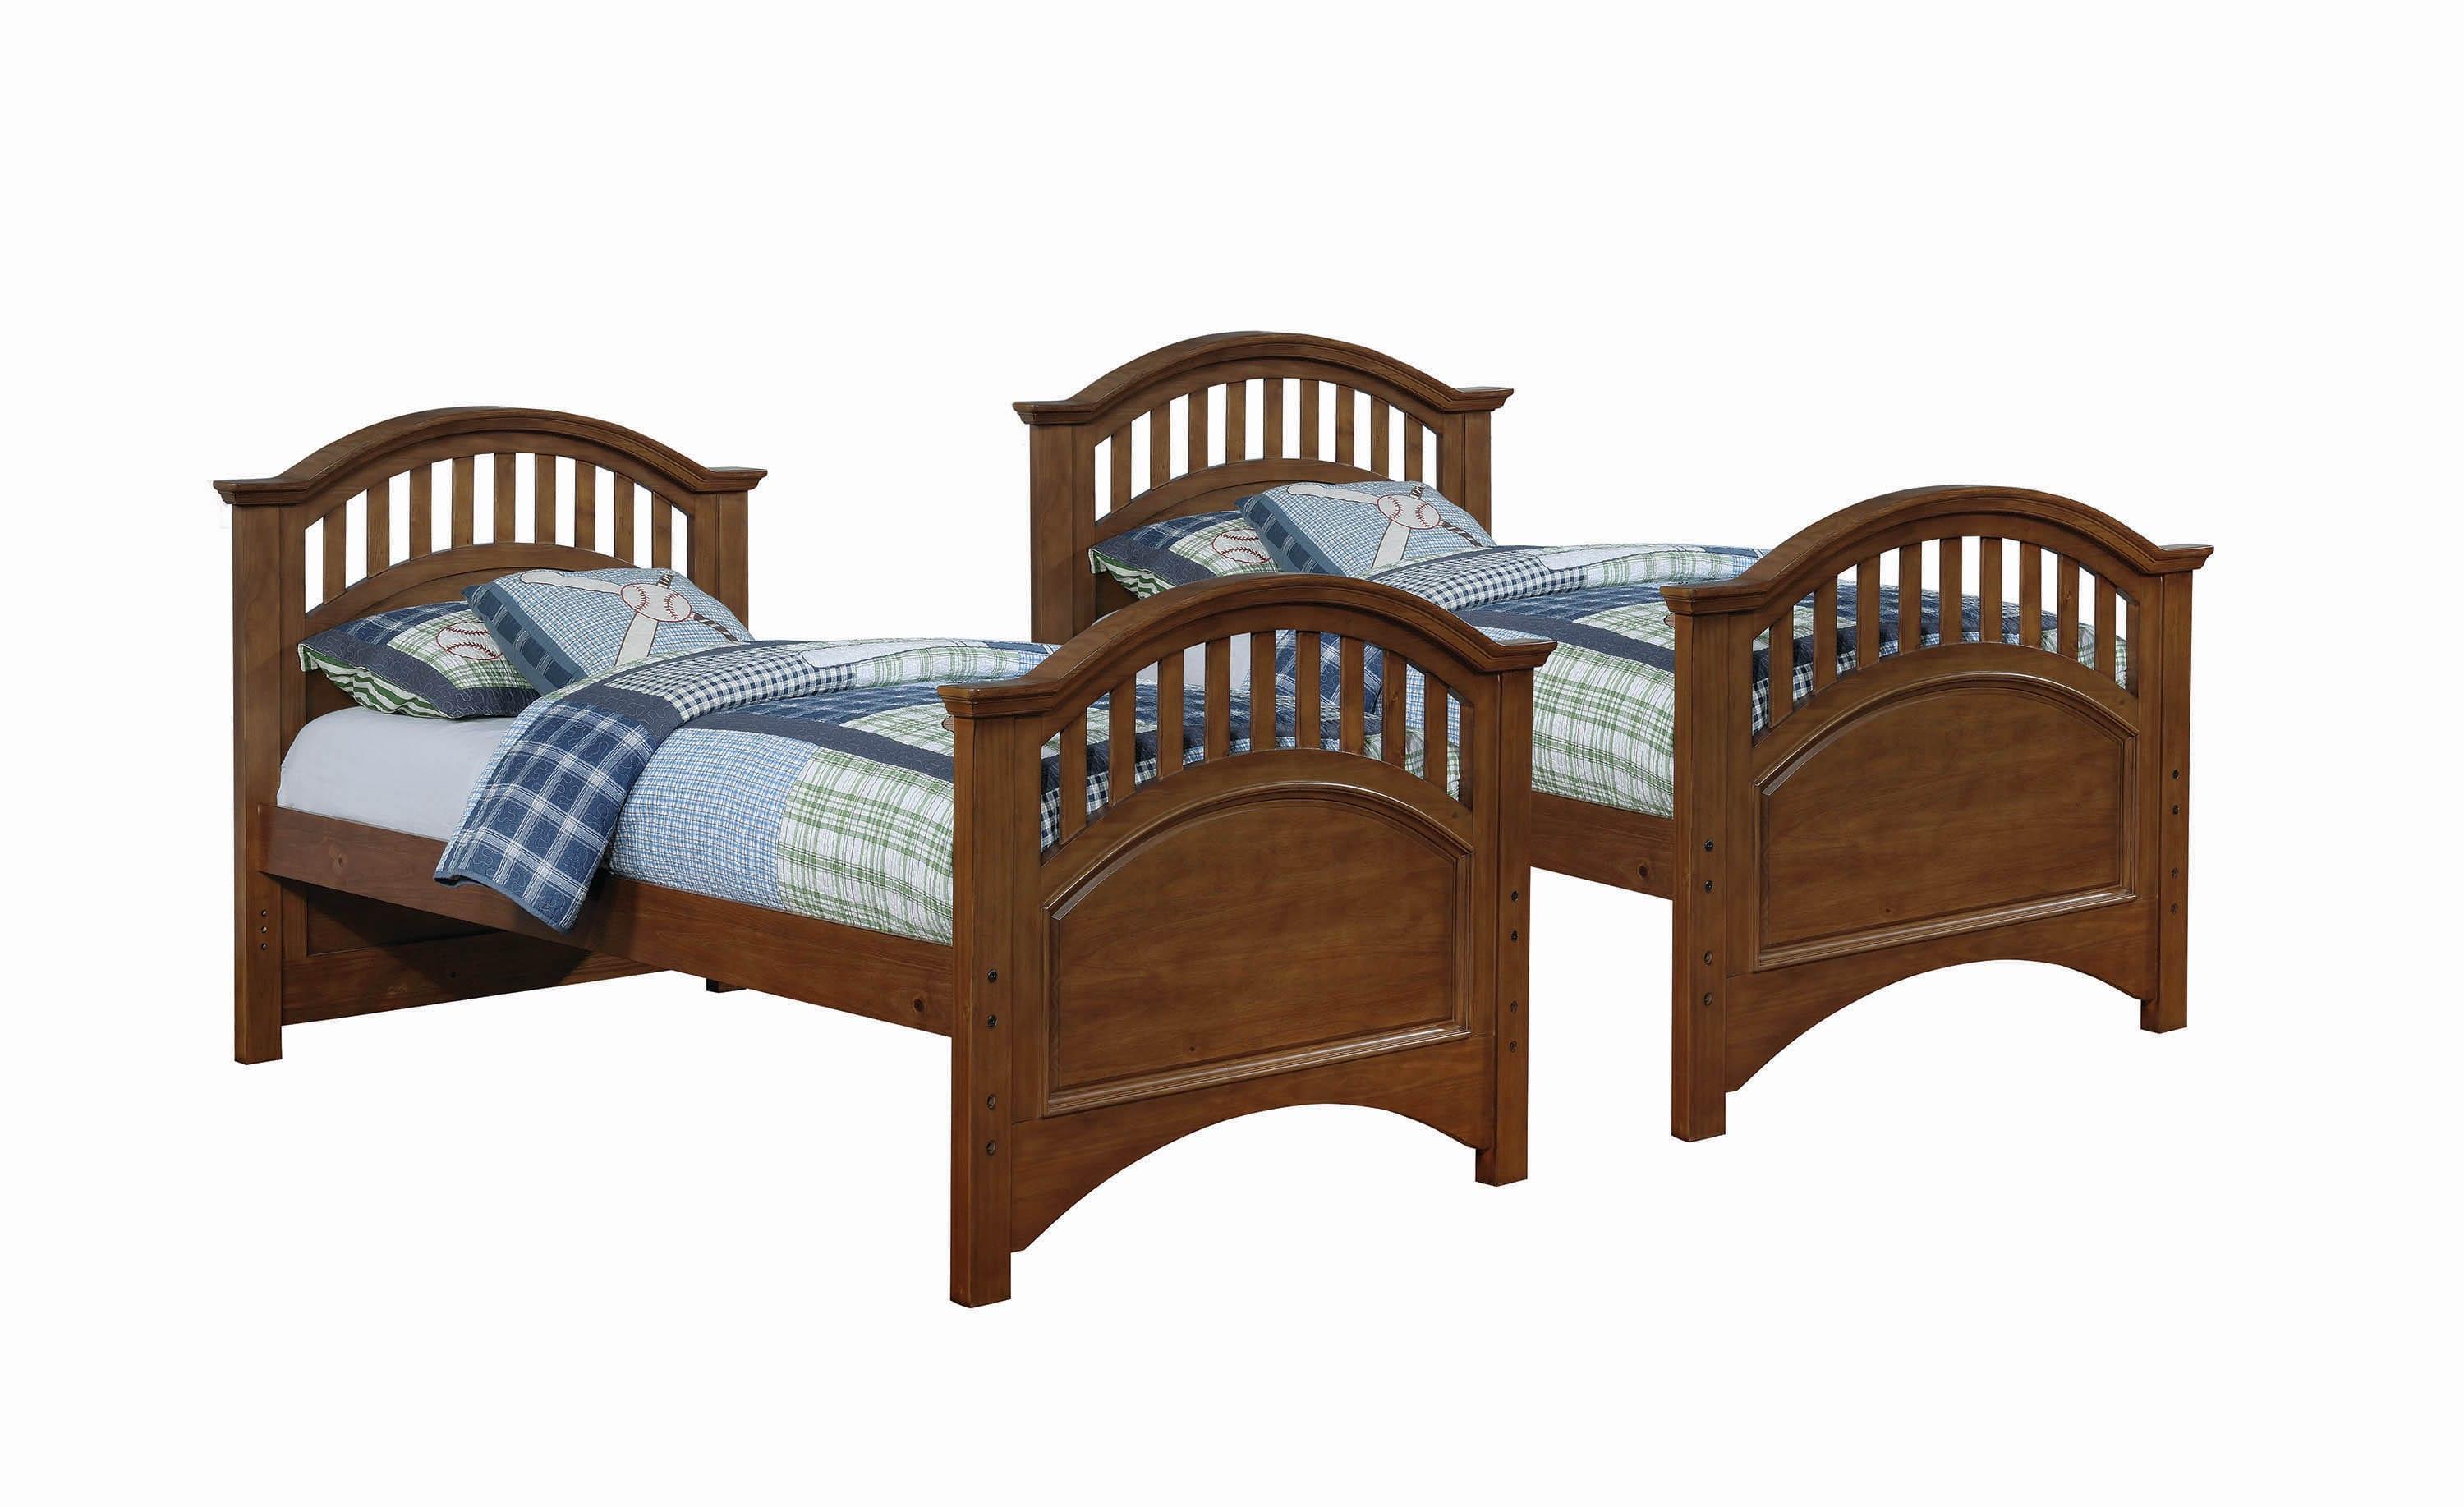 Modern Bunk Bed Halsted 461080 in Brown 